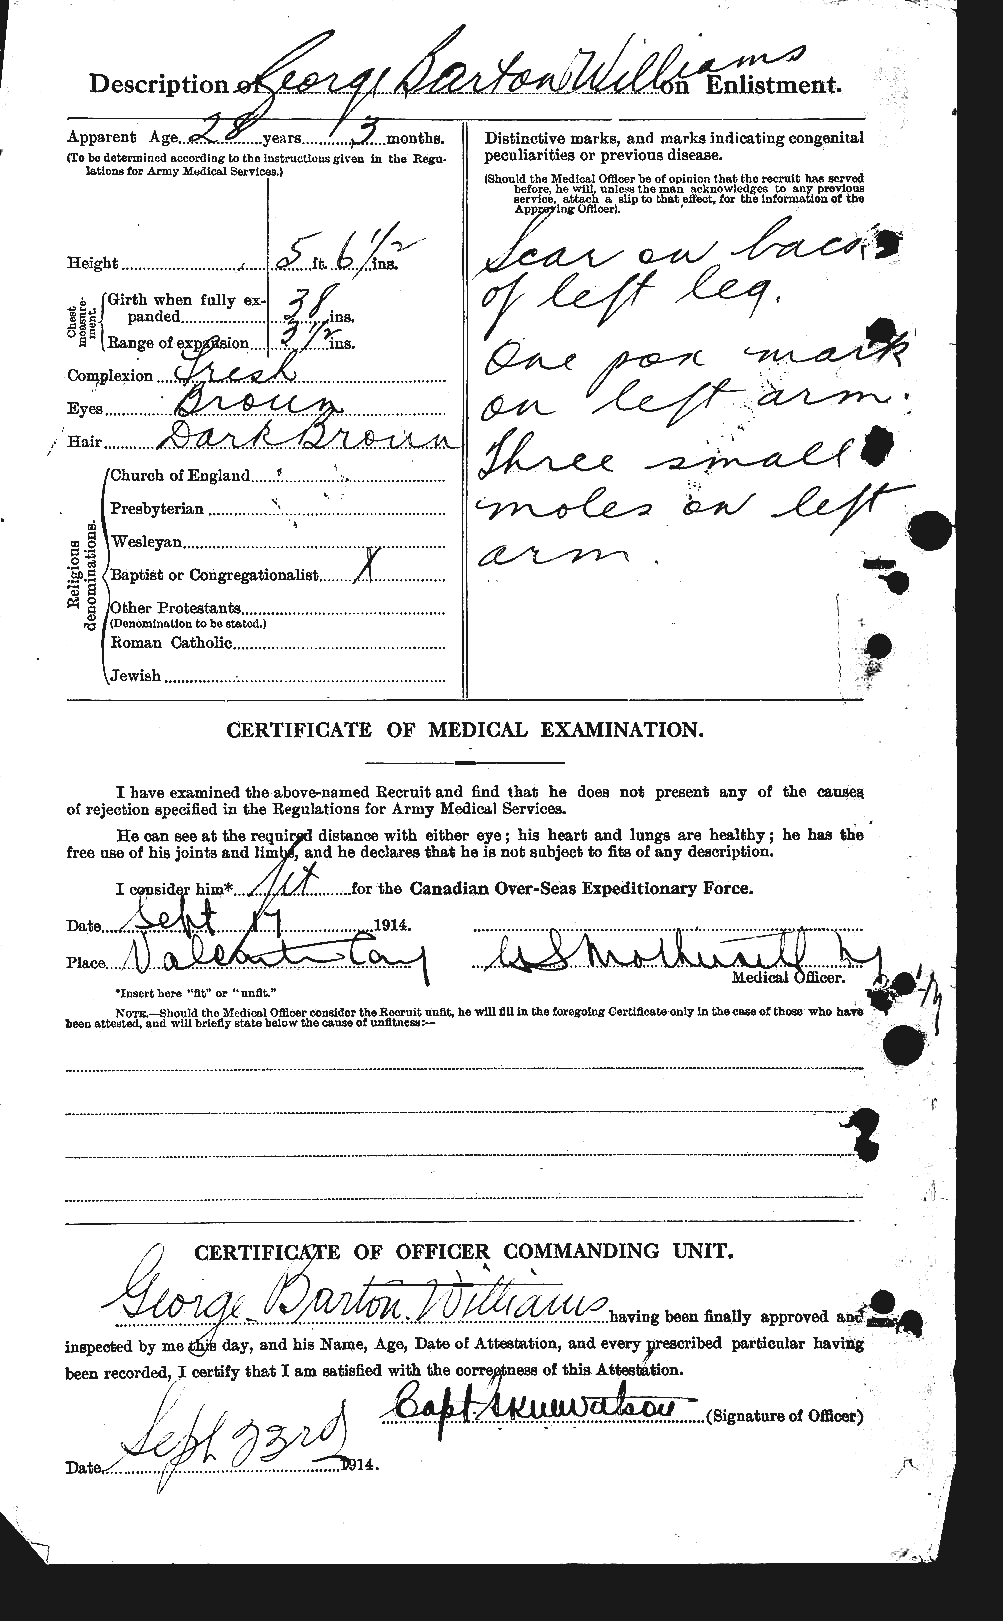 Personnel Records of the First World War - CEF 676028b